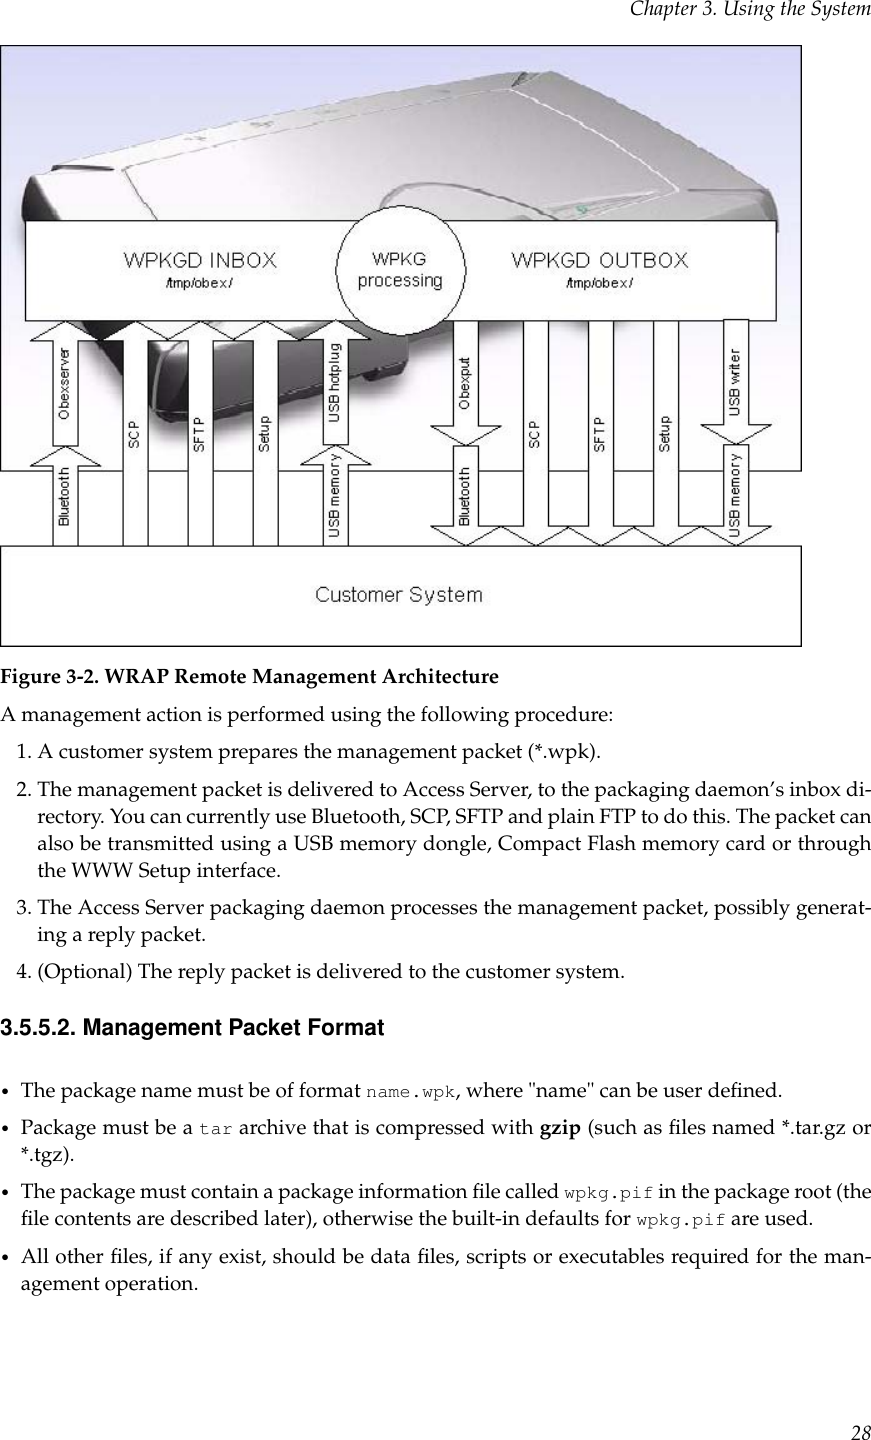 Chapter 3. Using the SystemFigure 3-2. WRAP Remote Management ArchitectureA management action is performed using the following procedure:1. A customer system prepares the management packet (*.wpk).2. The management packet is delivered to Access Server, to the packaging daemon’s inbox di-rectory. You can currently use Bluetooth, SCP, SFTP and plain FTP to do this. The packet canalso be transmitted using a USB memory dongle, Compact Flash memory card or throughthe WWW Setup interface.3. The Access Server packaging daemon processes the management packet, possibly generat-ing a reply packet.4. (Optional) The reply packet is delivered to the customer system.3.5.5.2. Management Packet Format•The package name must be of format name.wpk, where &quot;name&quot; can be user deﬁned.•Package must be a tar archive that is compressed with gzip (such as ﬁles named *.tar.gz or*.tgz).•The package must contain a package information ﬁle called wpkg.pif in the package root (theﬁle contents are described later), otherwise the built-in defaults for wpkg.pif are used.•All other ﬁles, if any exist, should be data ﬁles, scripts or executables required for the man-agement operation.28